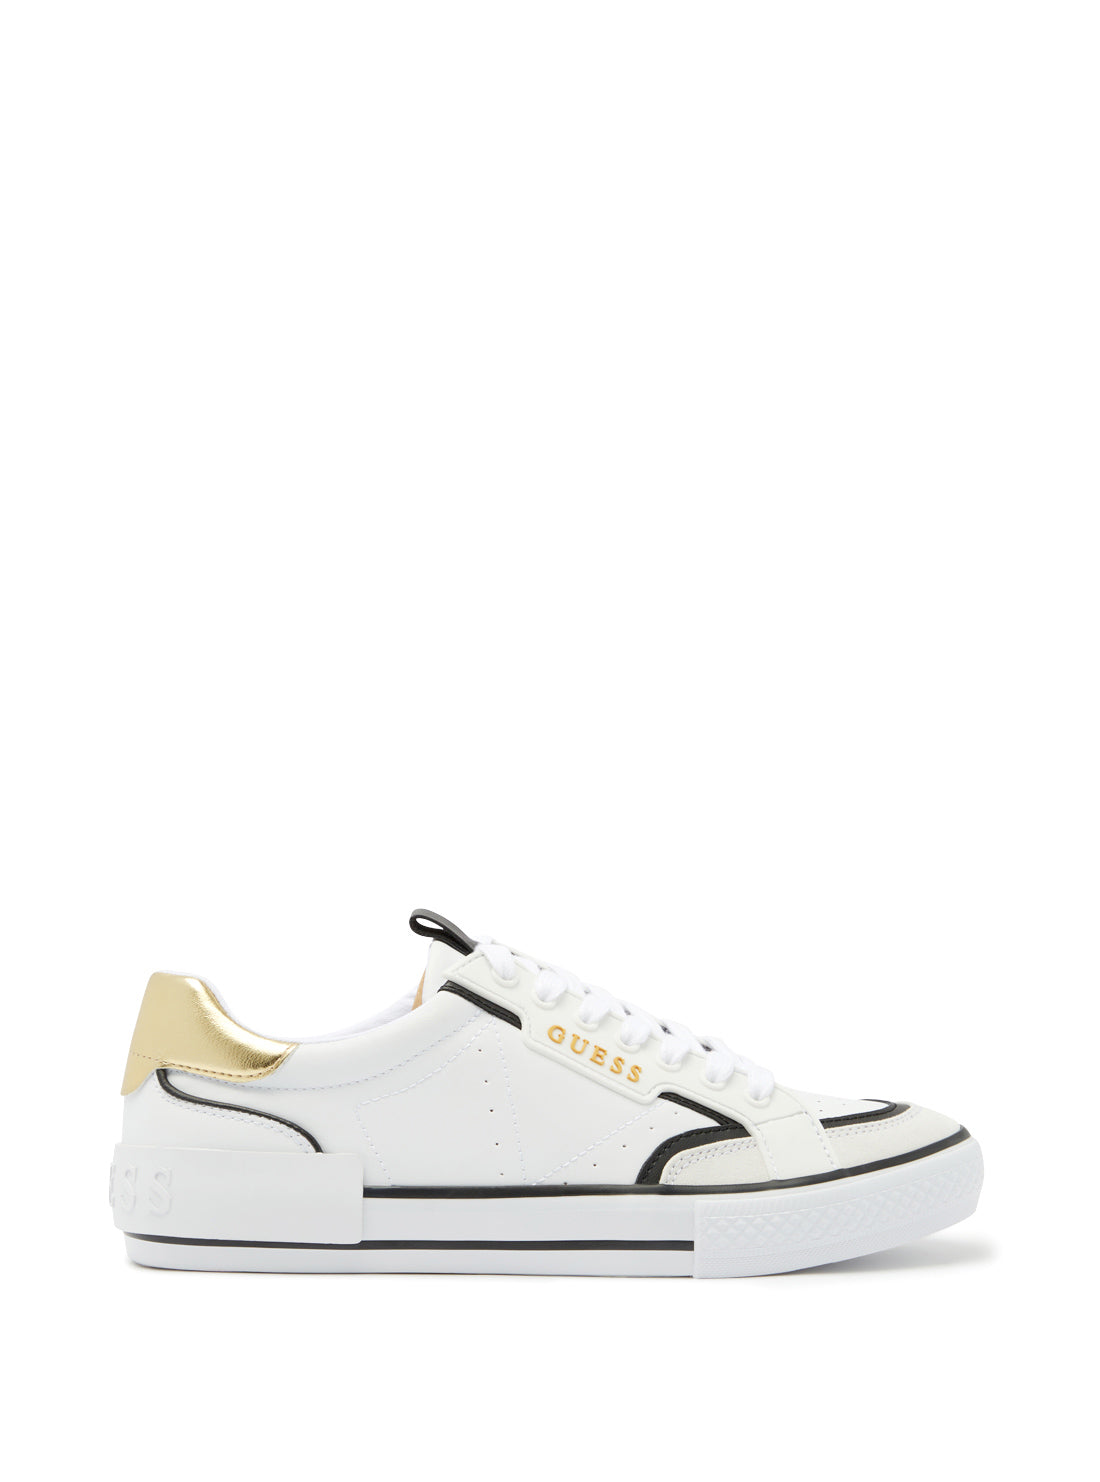 GUESS Women's White Gold Lollin Low Top Sneakers LOLLIN-A WHI03 Side View